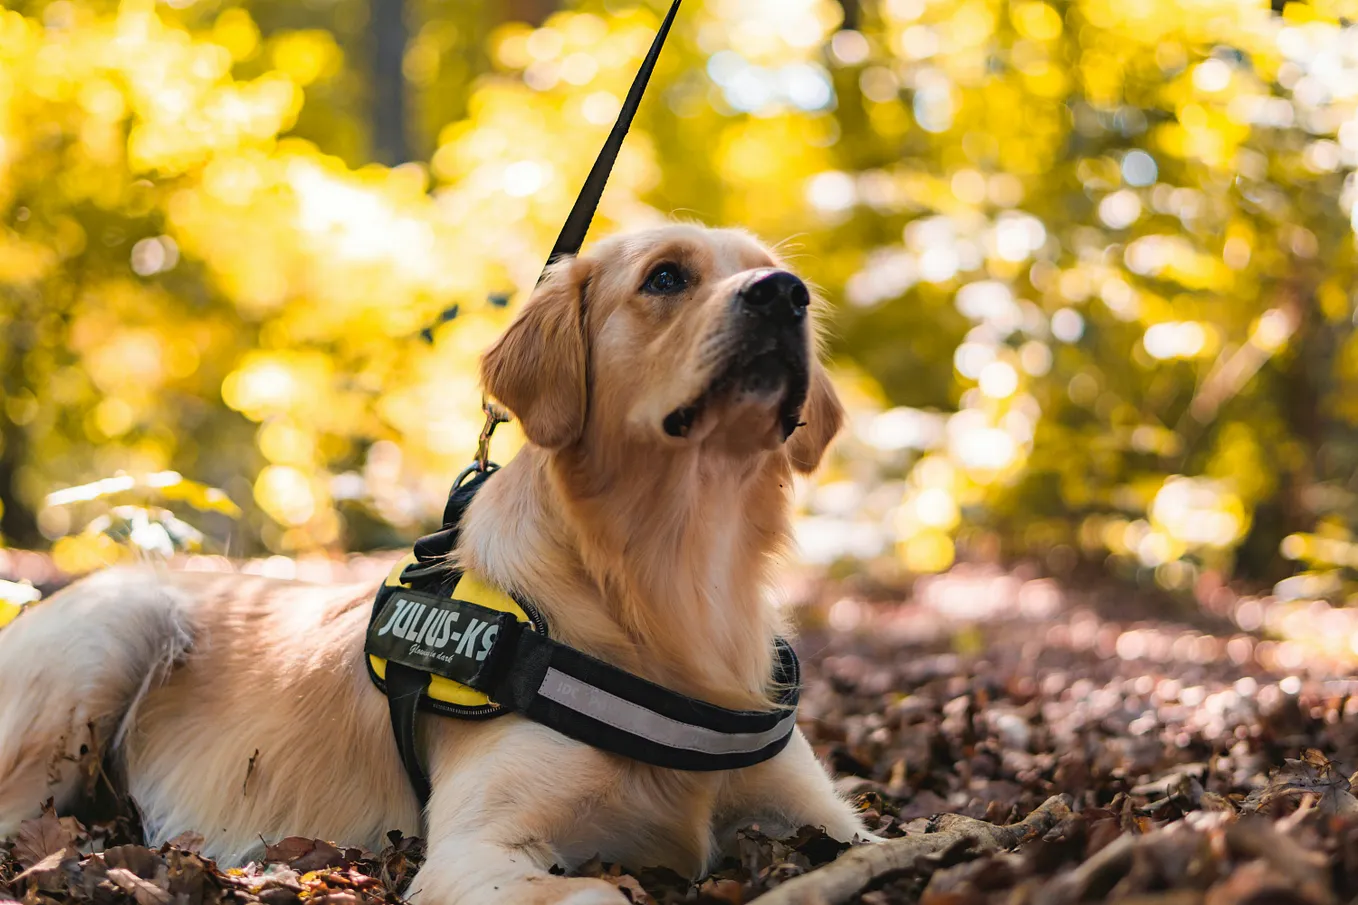 A golden retriever with a yellow and black K9 harness laying down in leaves while on a leash. In the back are yellowish-gold bushes/grass that is blurred out. The leaves/ground beneath the dog is brown. He is gazing up at his handler out of frame.